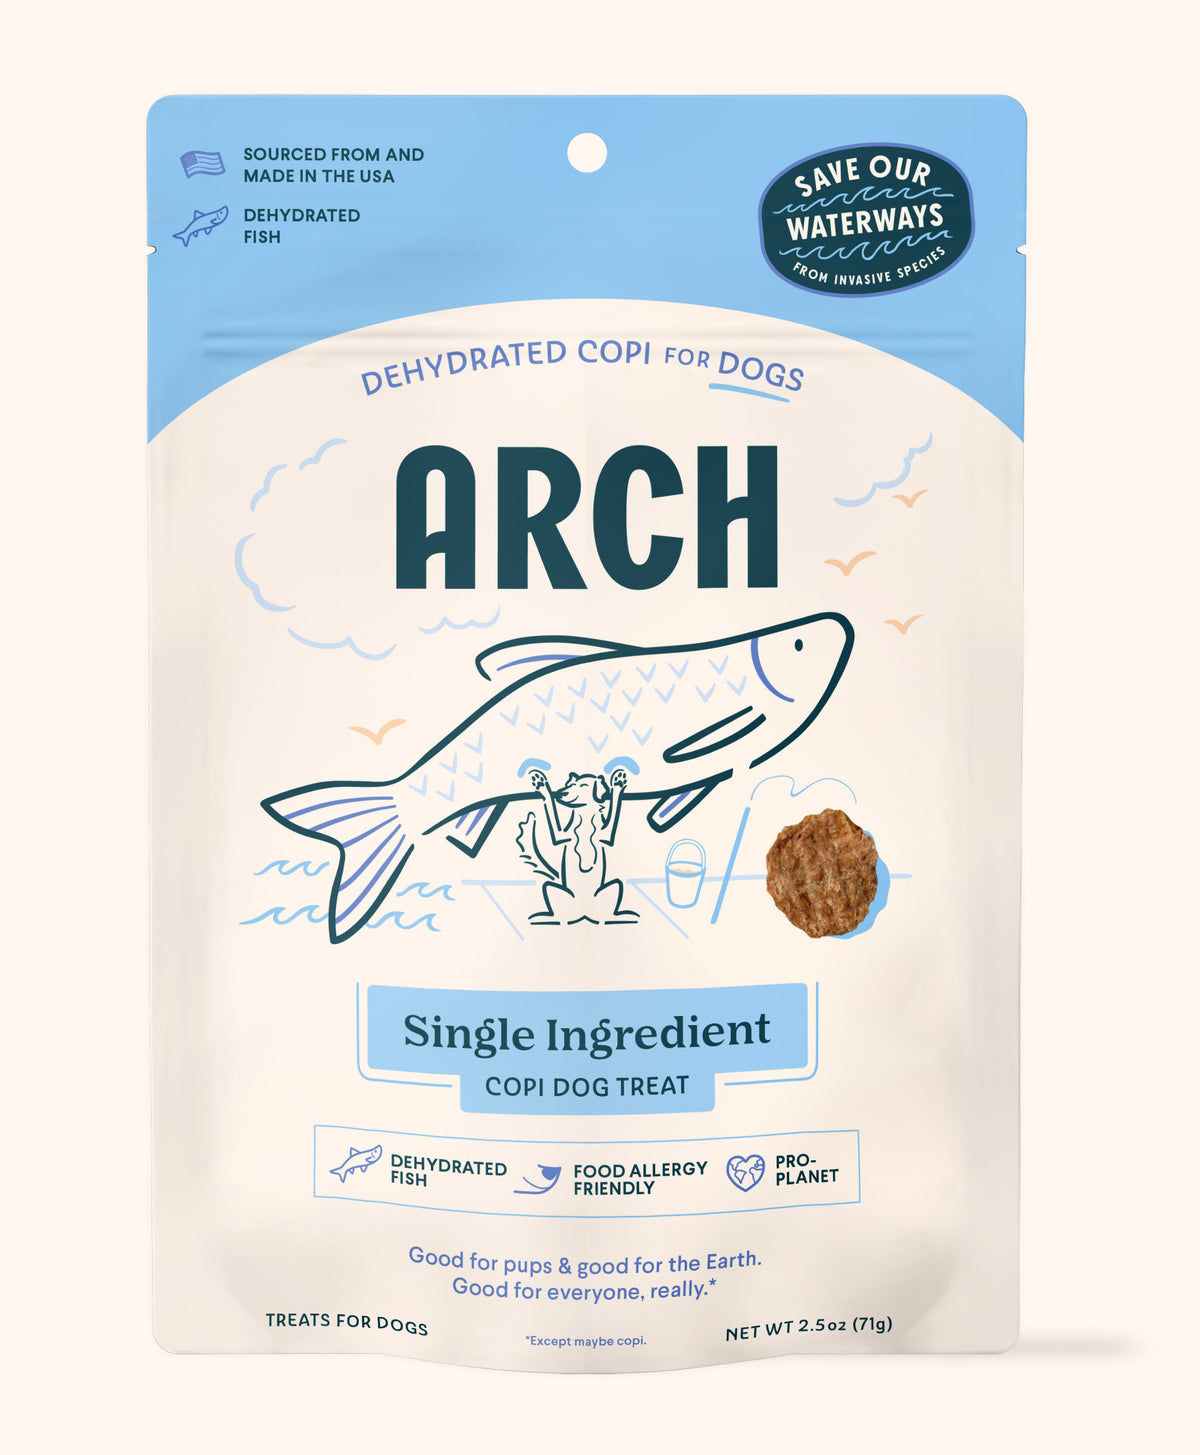 Hypoallergenic Treats for Dogs package from Arch Pet Food